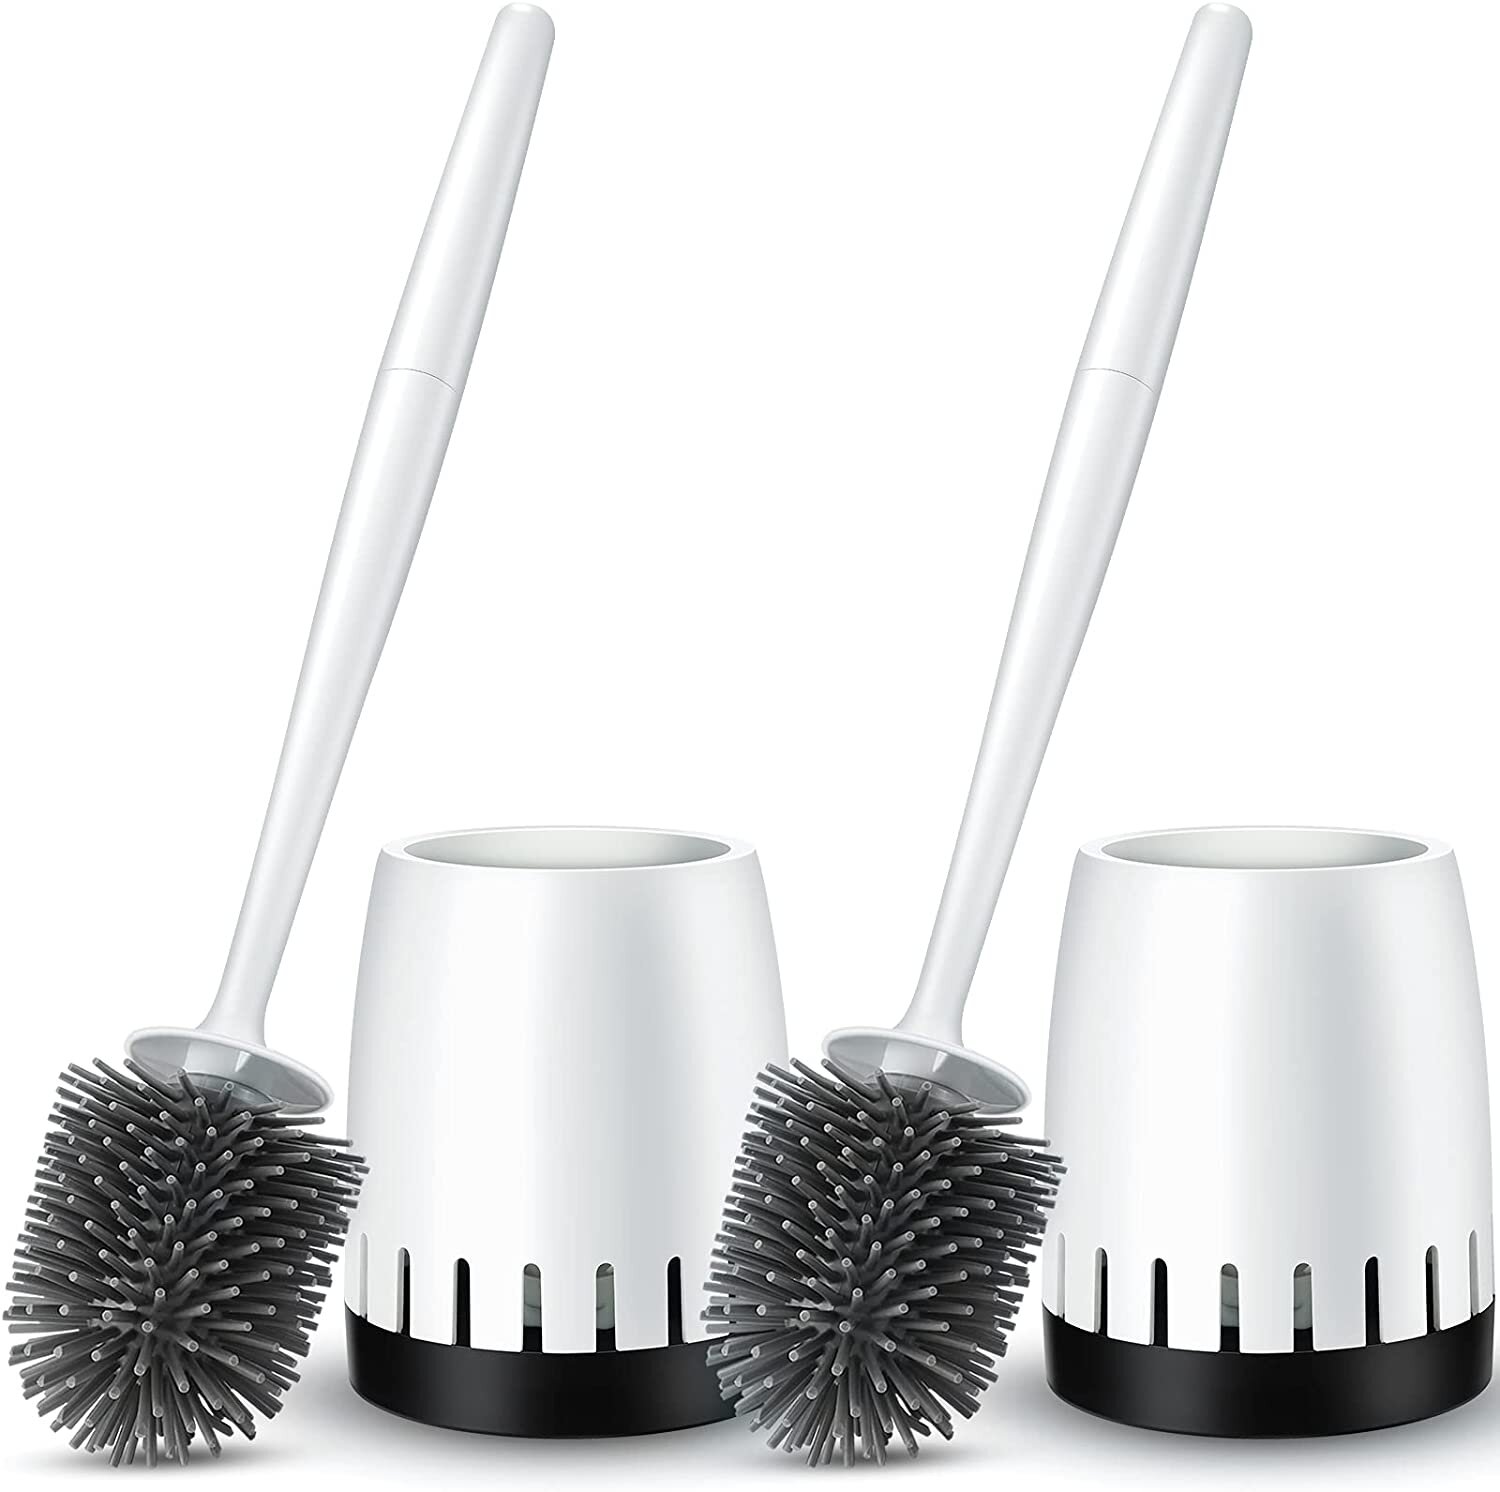 Deluxe Heavy Duty Toilet Plunger with Bowl Brush Caddy Holder 1 or 2 Pack 